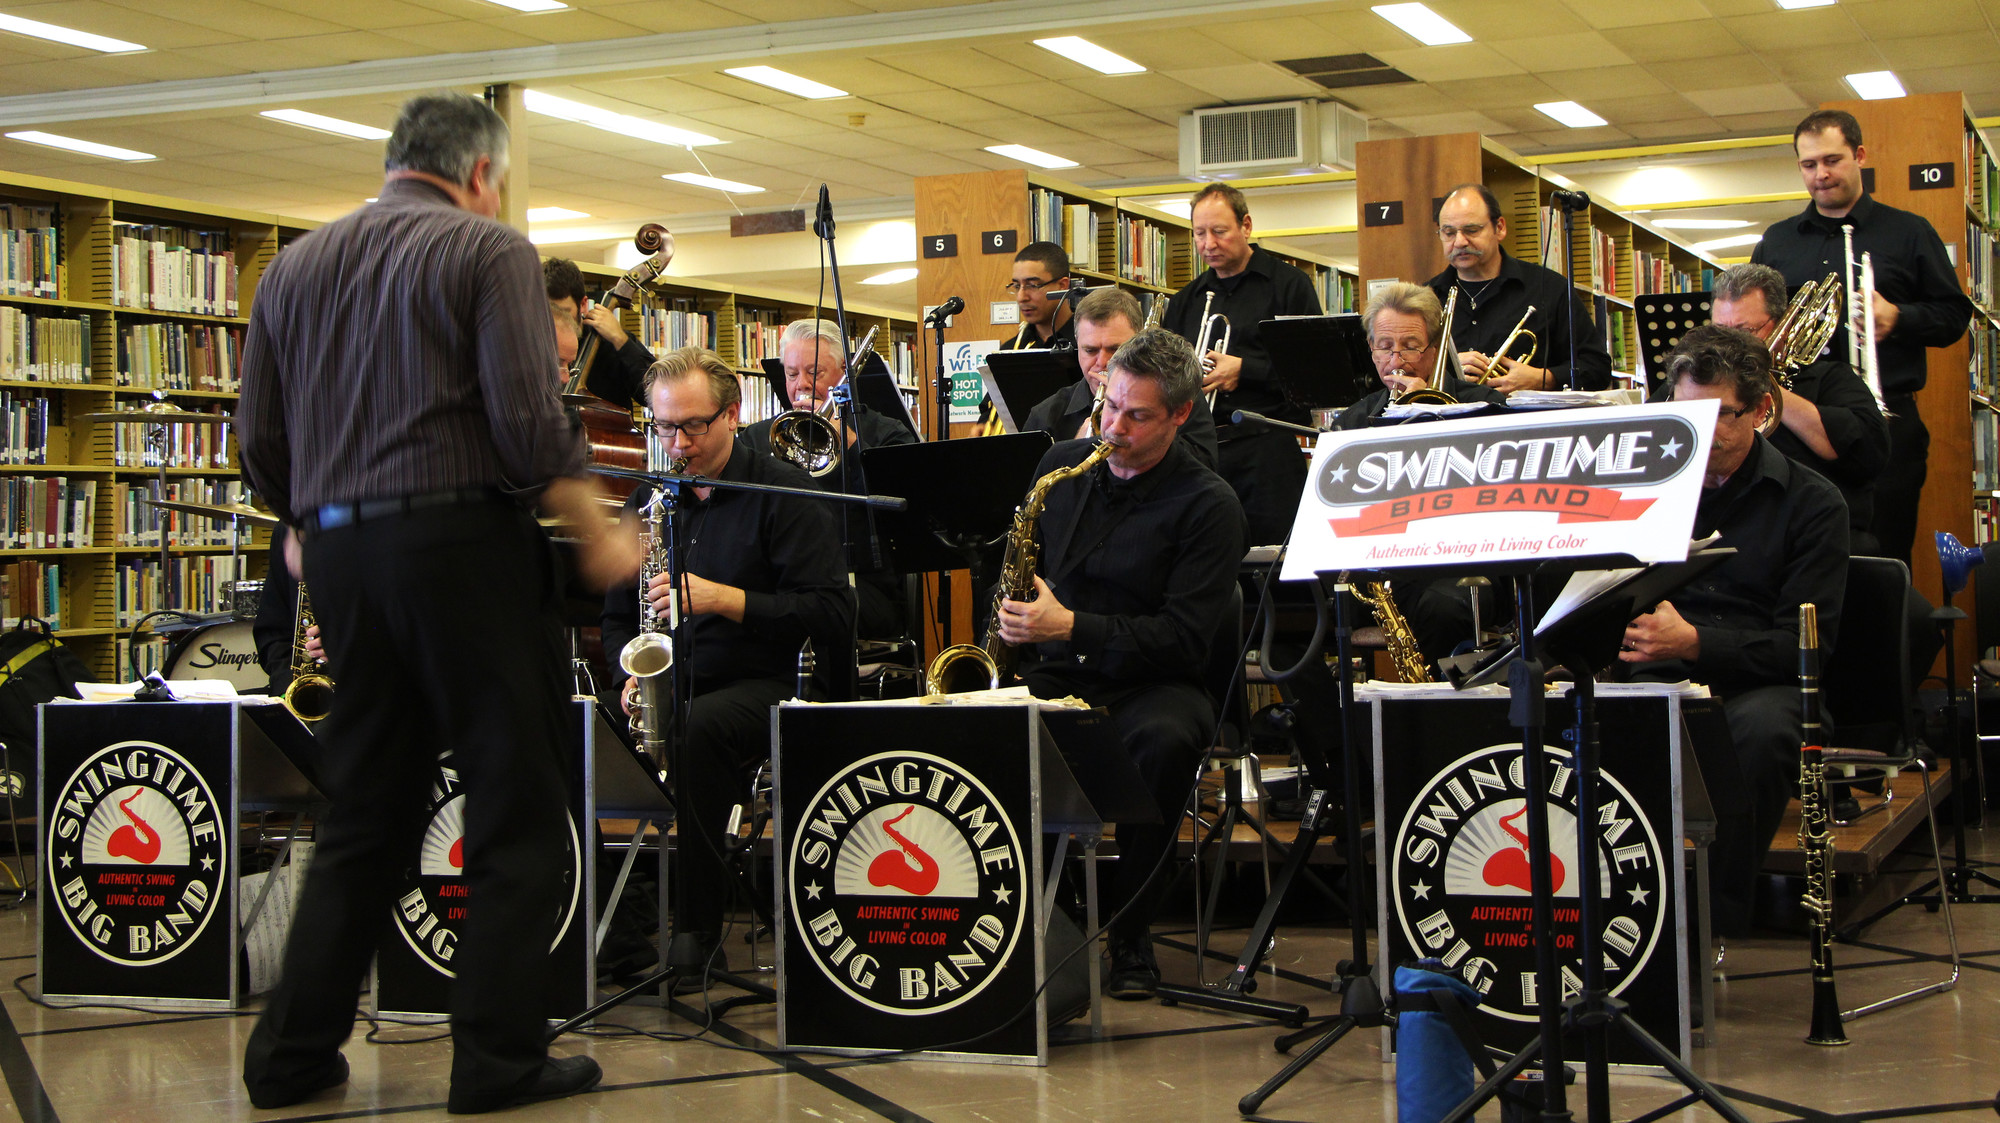 The many members of the Swingtime Big Band played their instruments to the beats and sounds of yesteryear on Sunday.